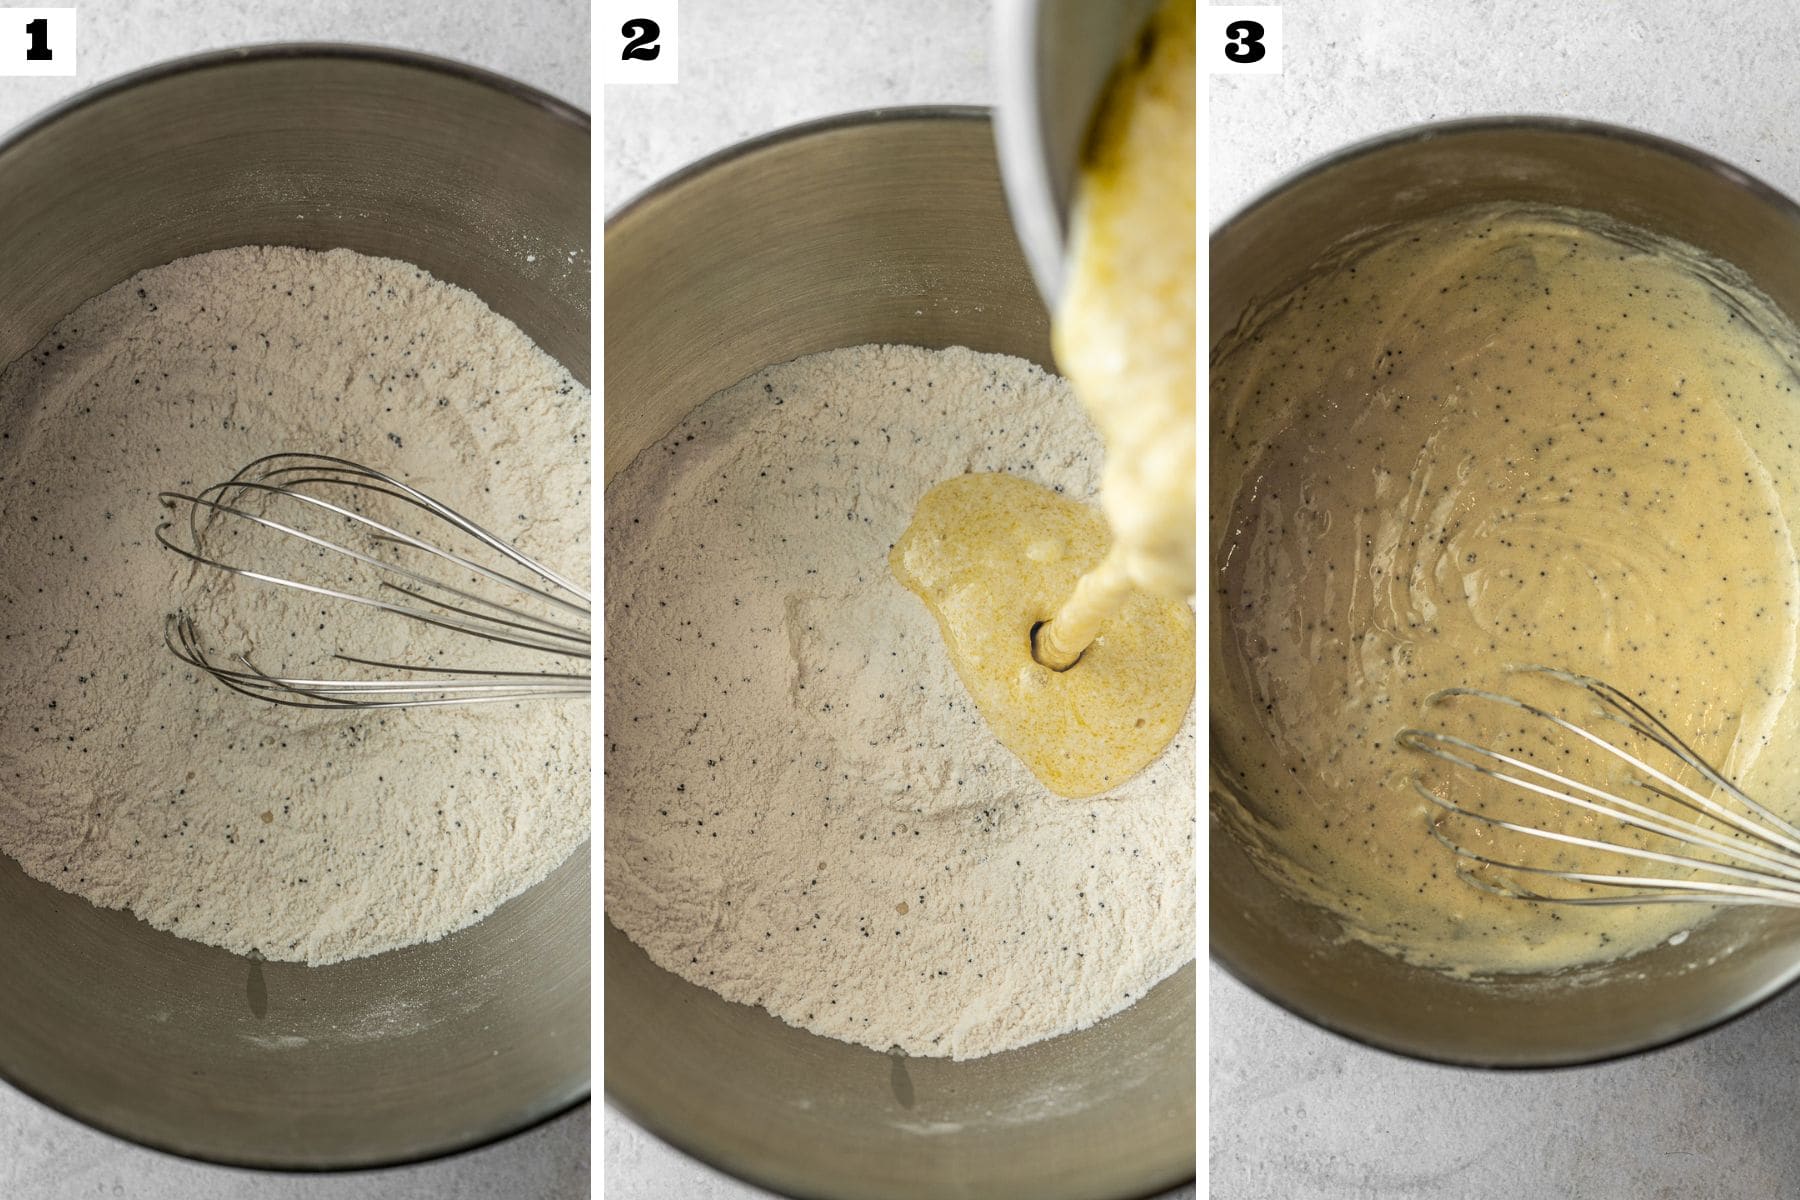 A three part numbered collage of mixing wet ingredients into dry ingredients to make a batter.